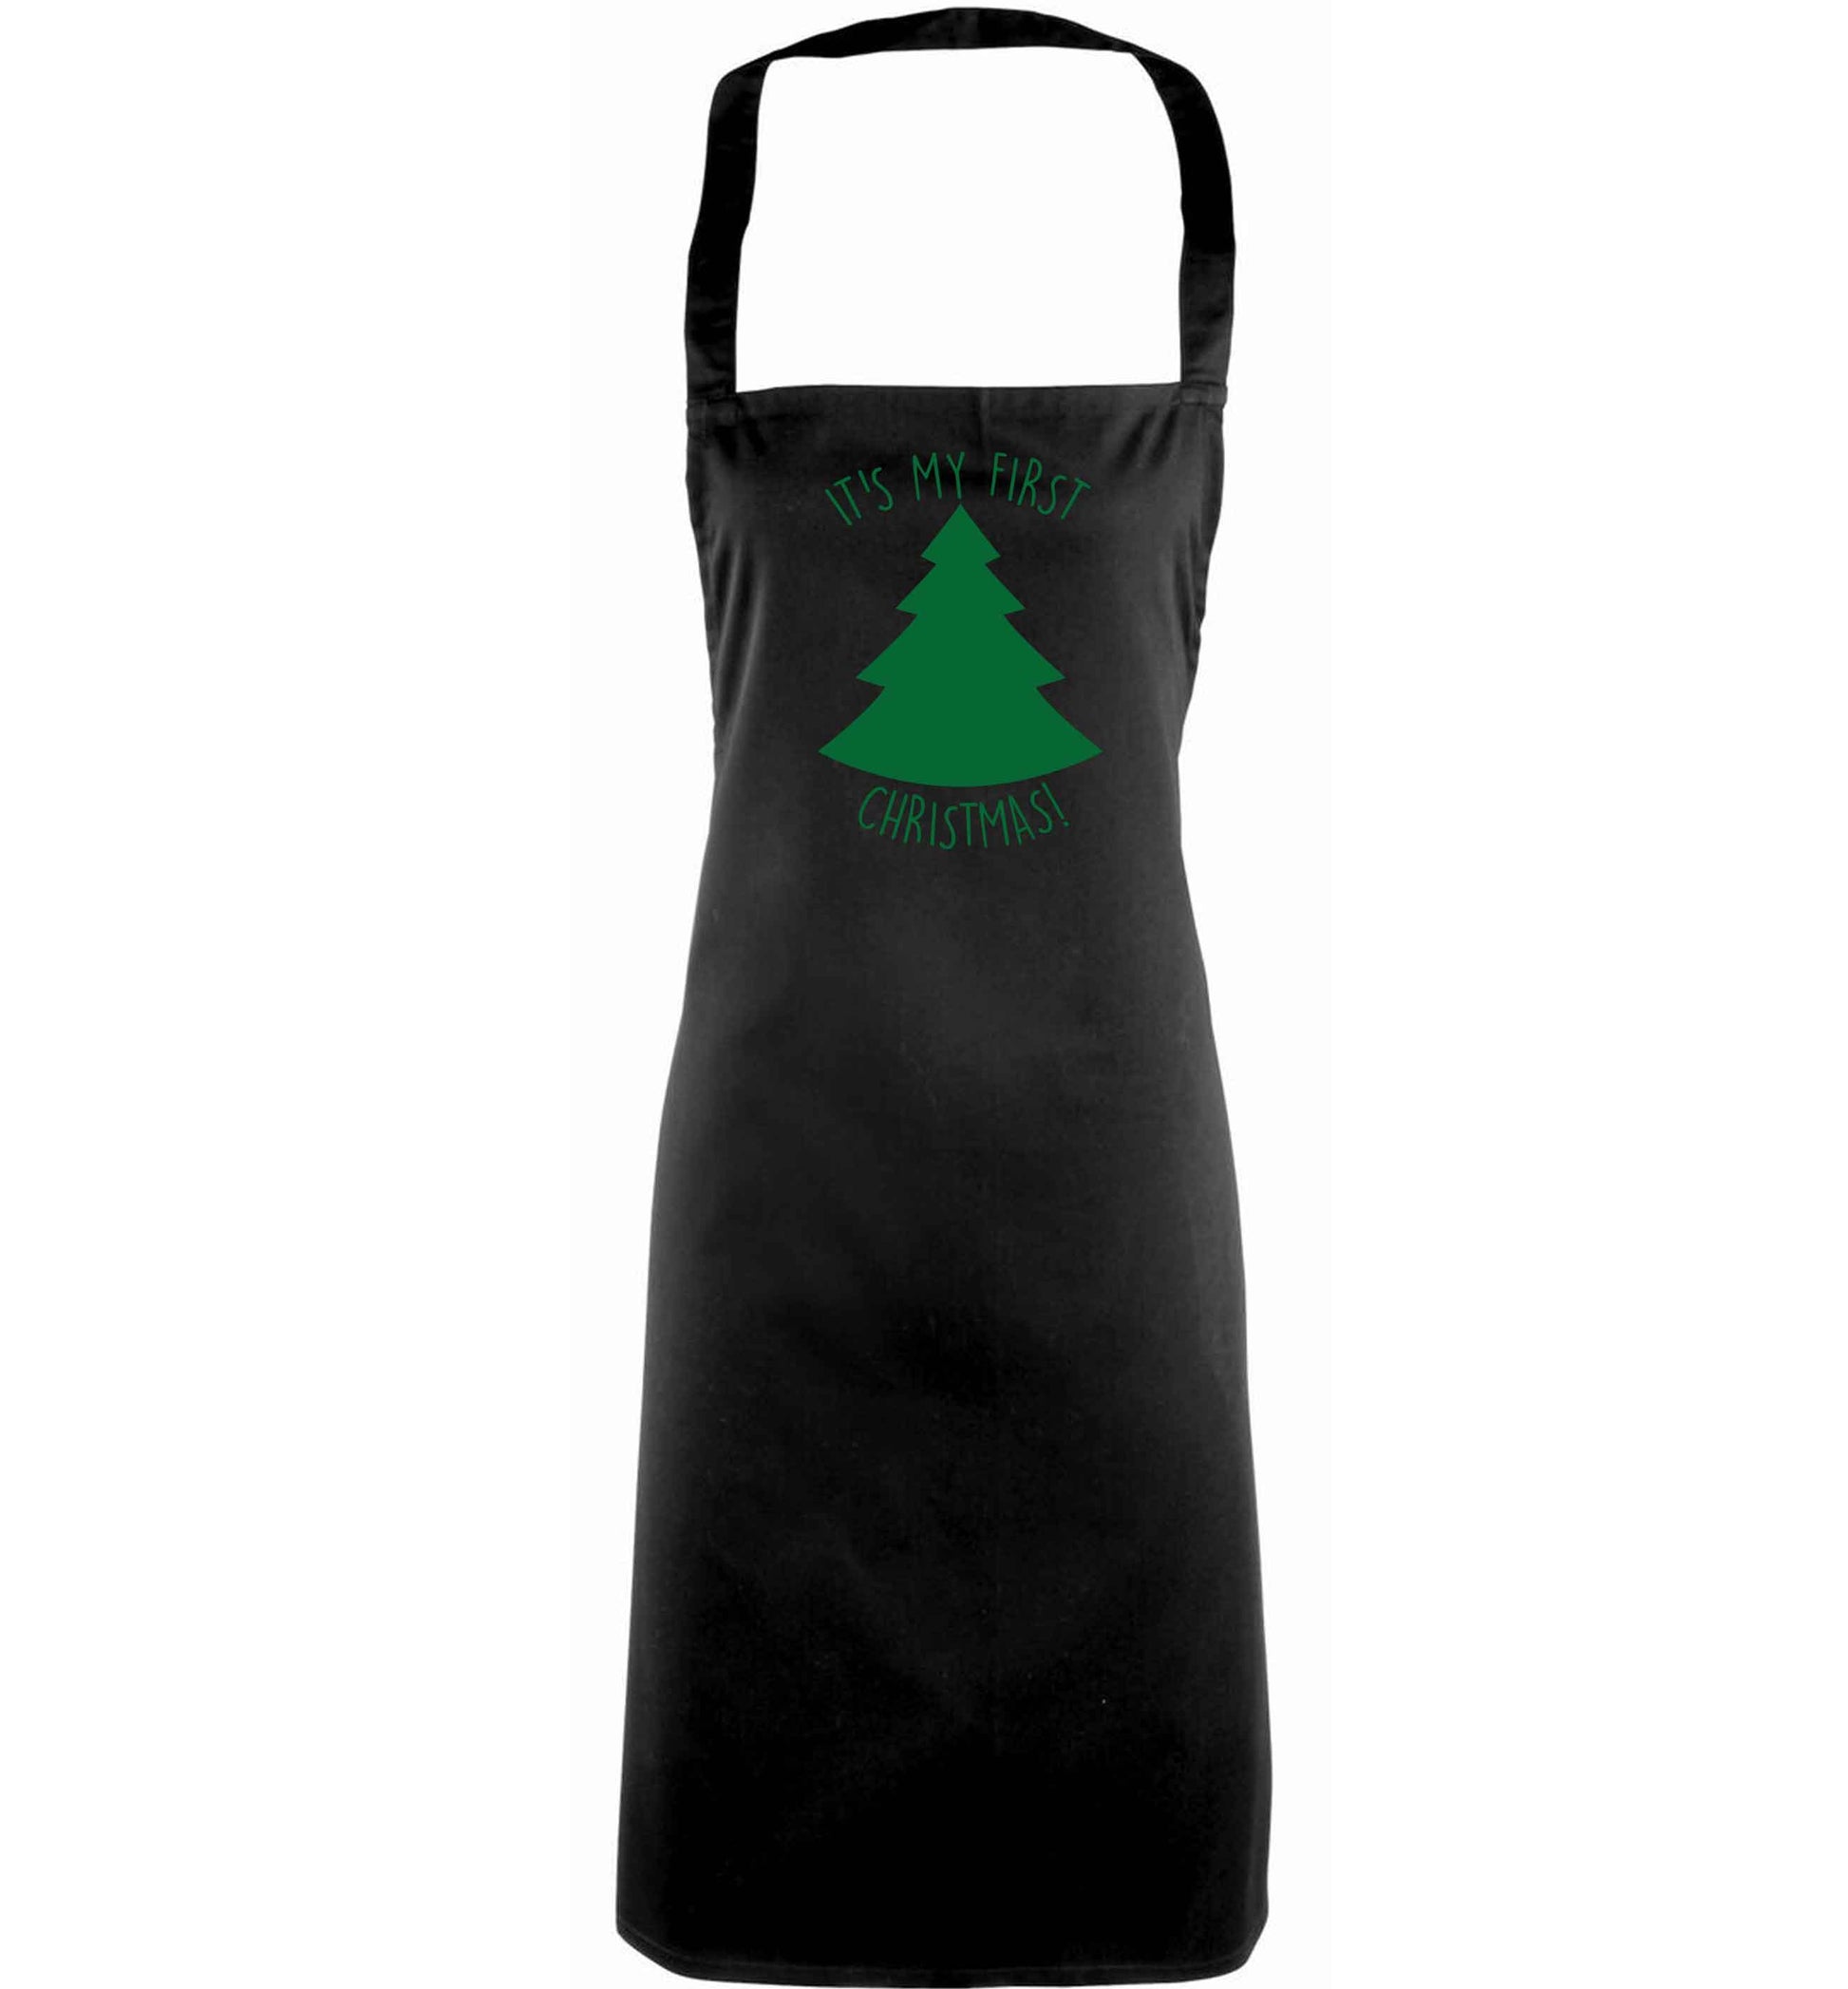 It's my first Christmas - tree adults black apron